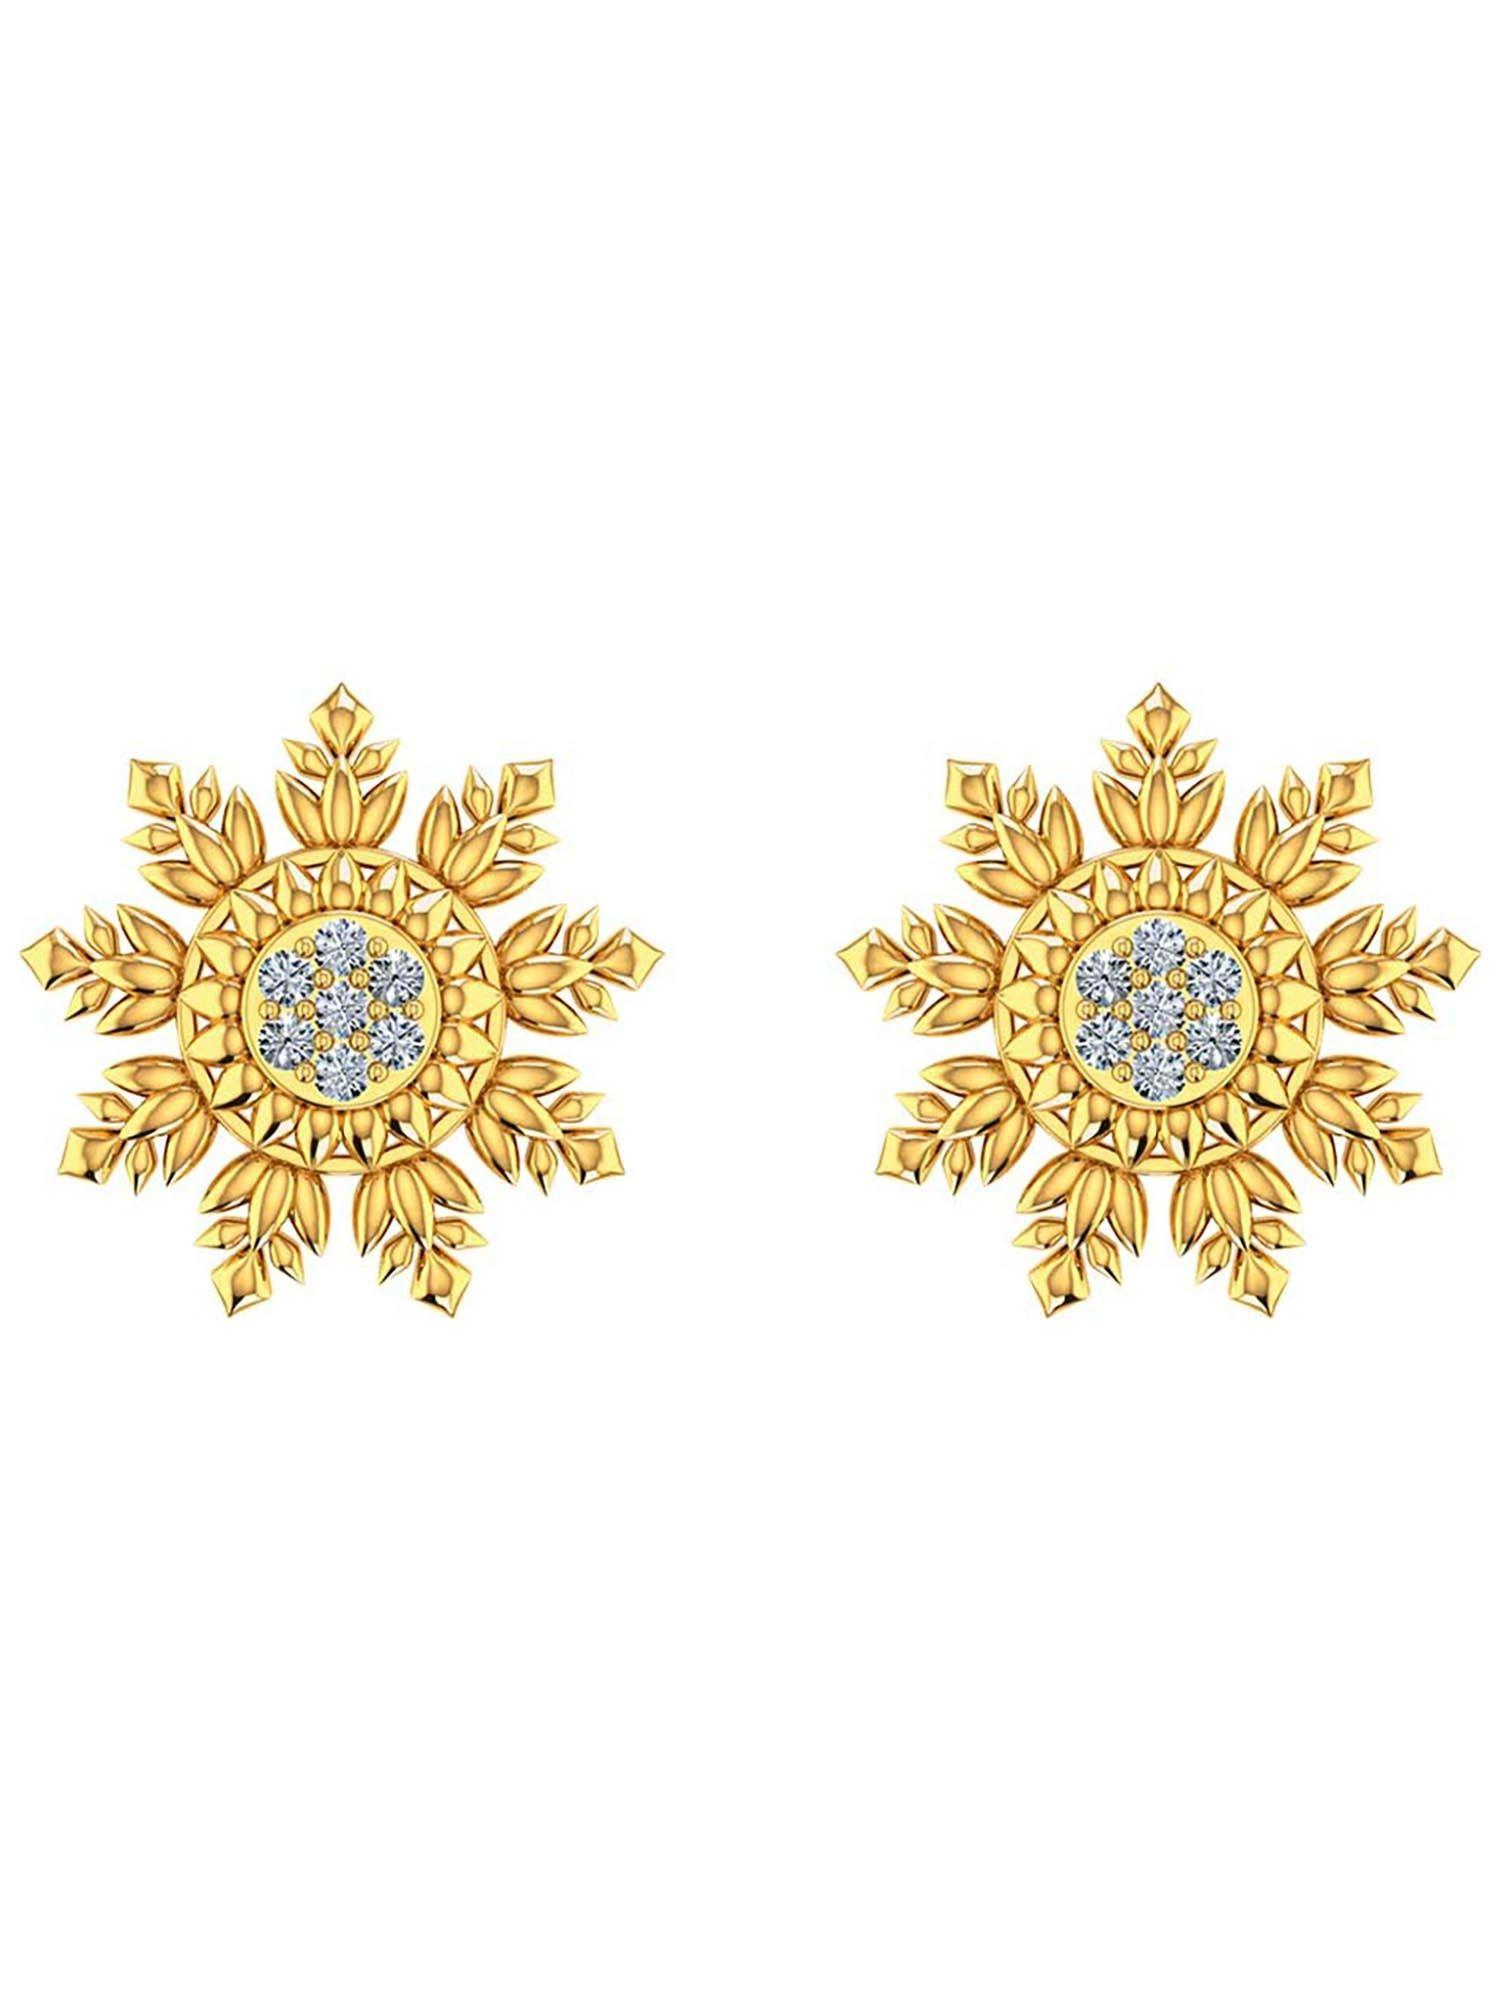 elsa-stud-gold-earrings-with-gold-screw